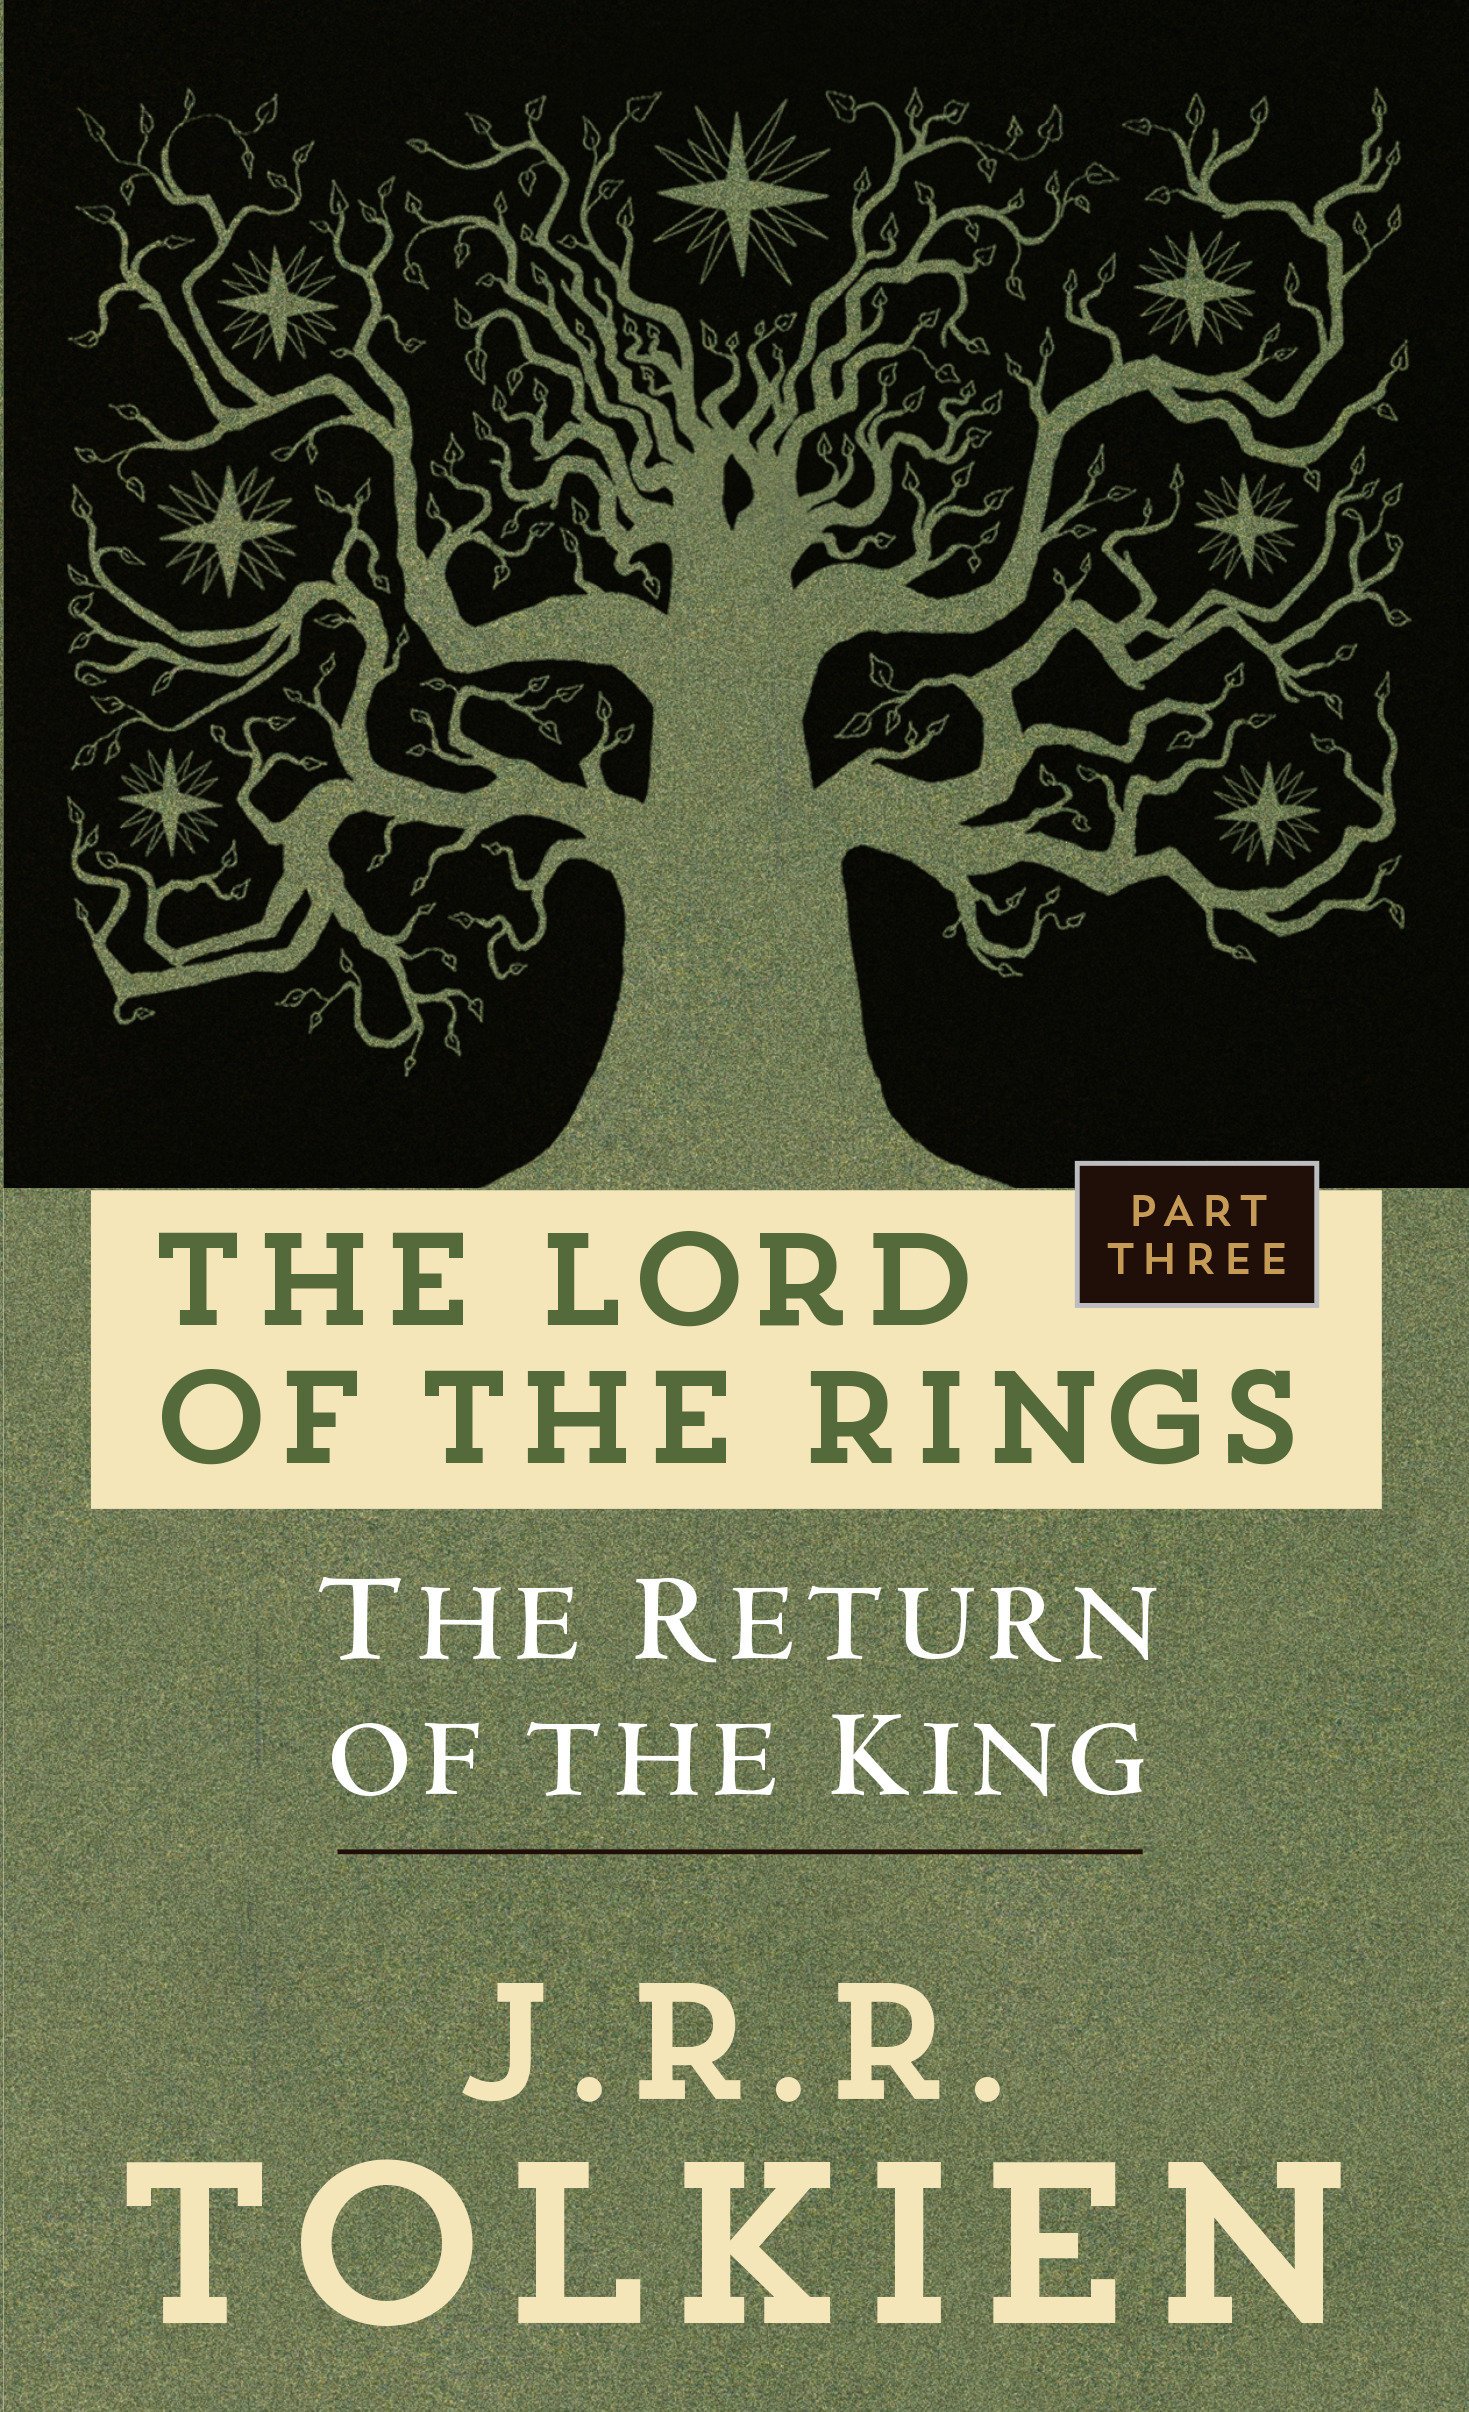 THE RETURN OF THE KING Being the Third Part of the Lord of the